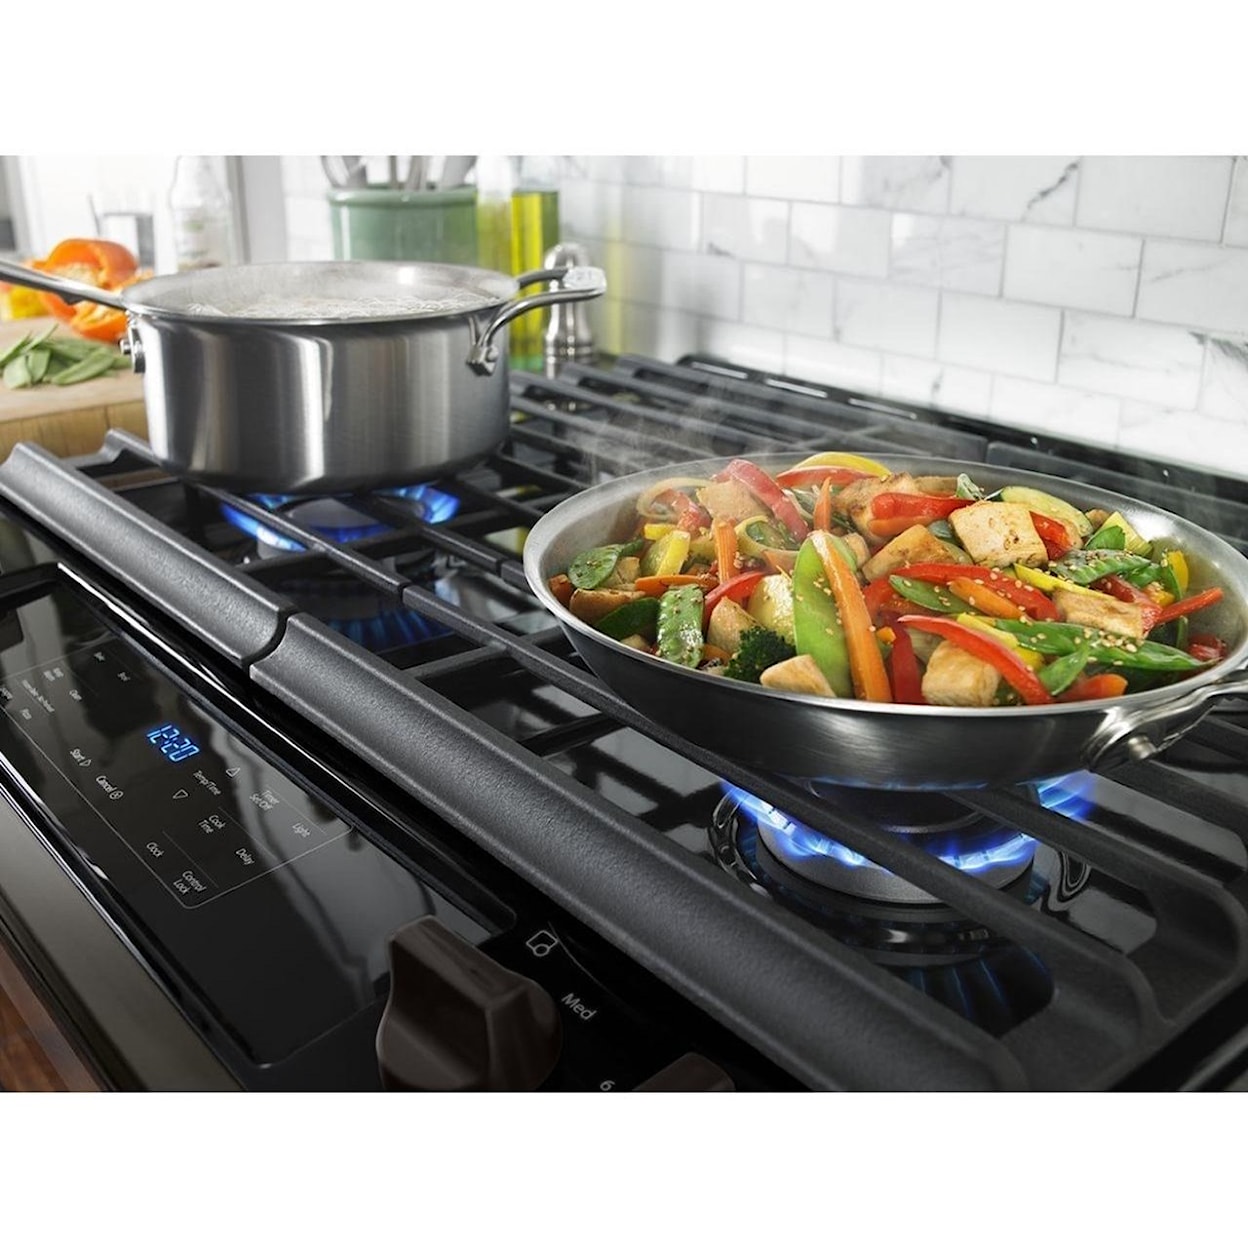 Whirlpool Gas Ranges 5.0 cu. ft. Front Control Slide-In Gas Range